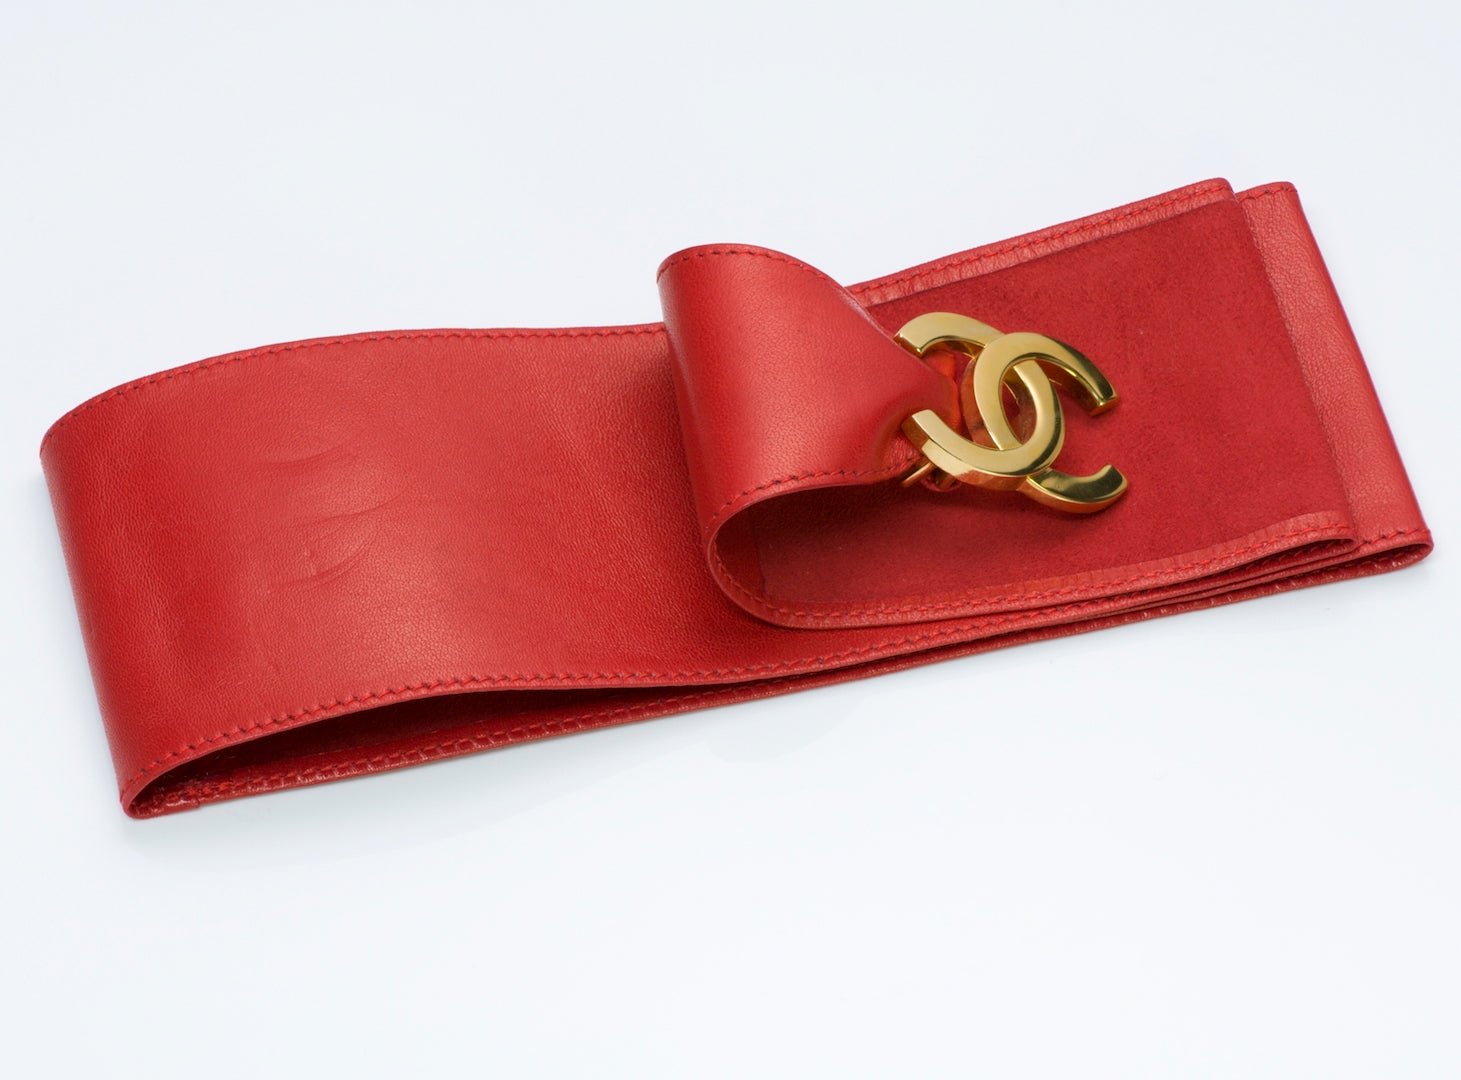 Chanel Red Leather Belt - DSF Antique Jewelry